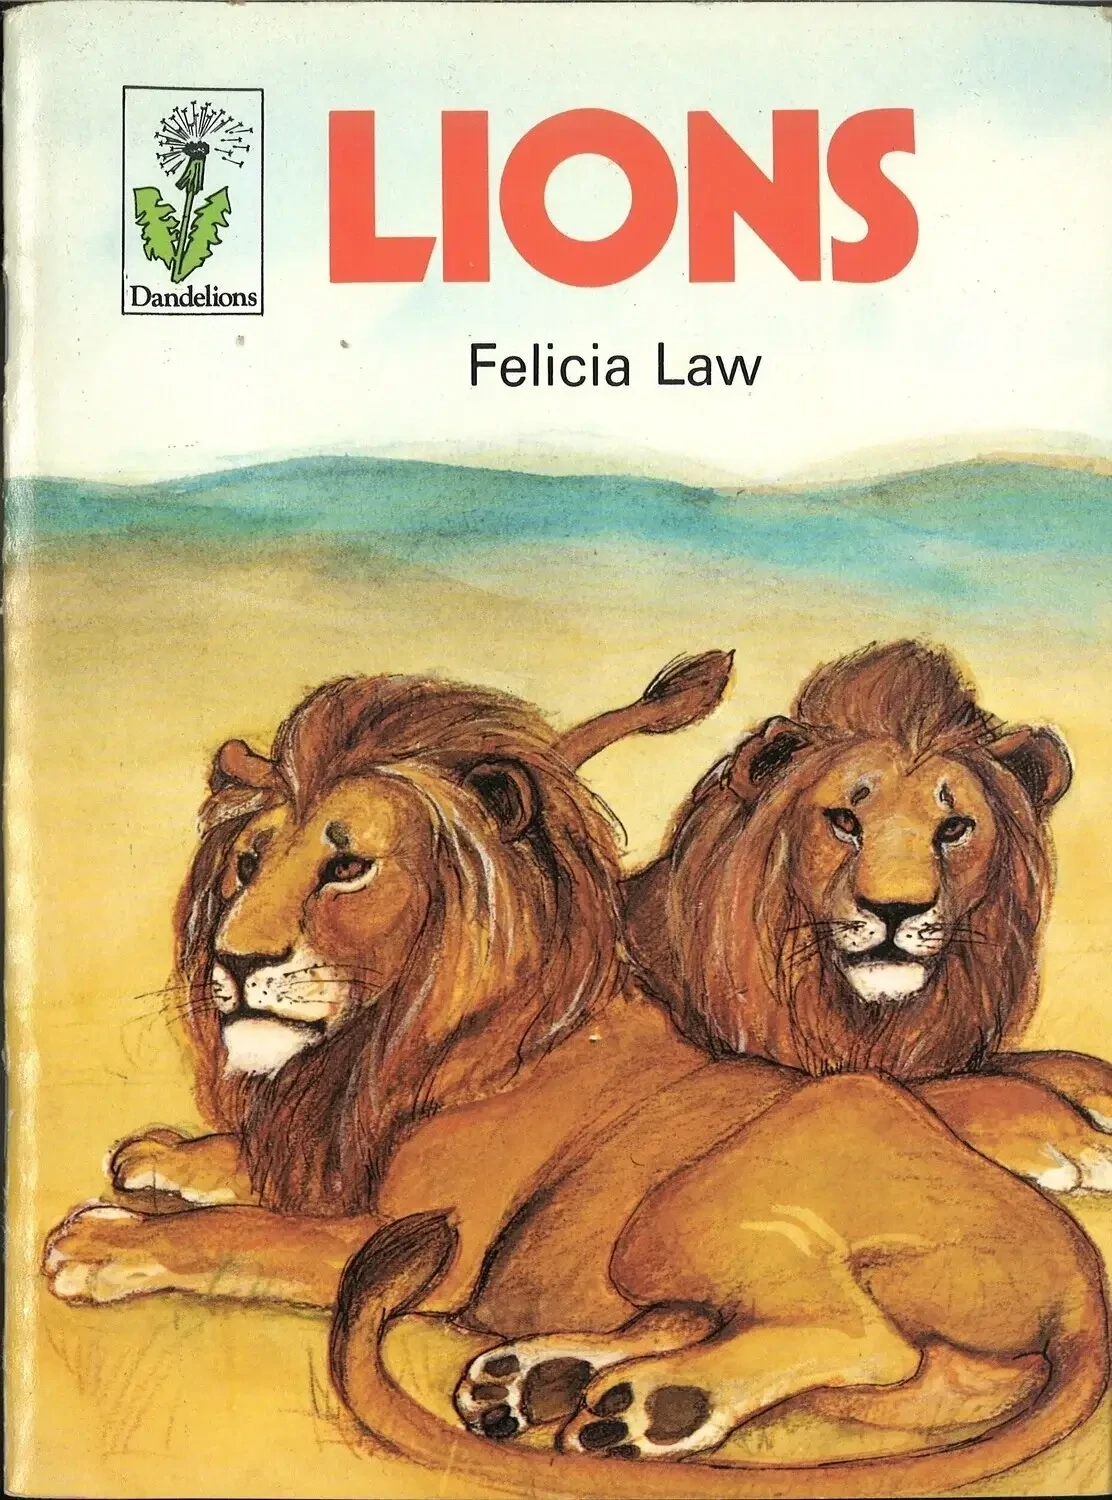 Lions by Felicia Law